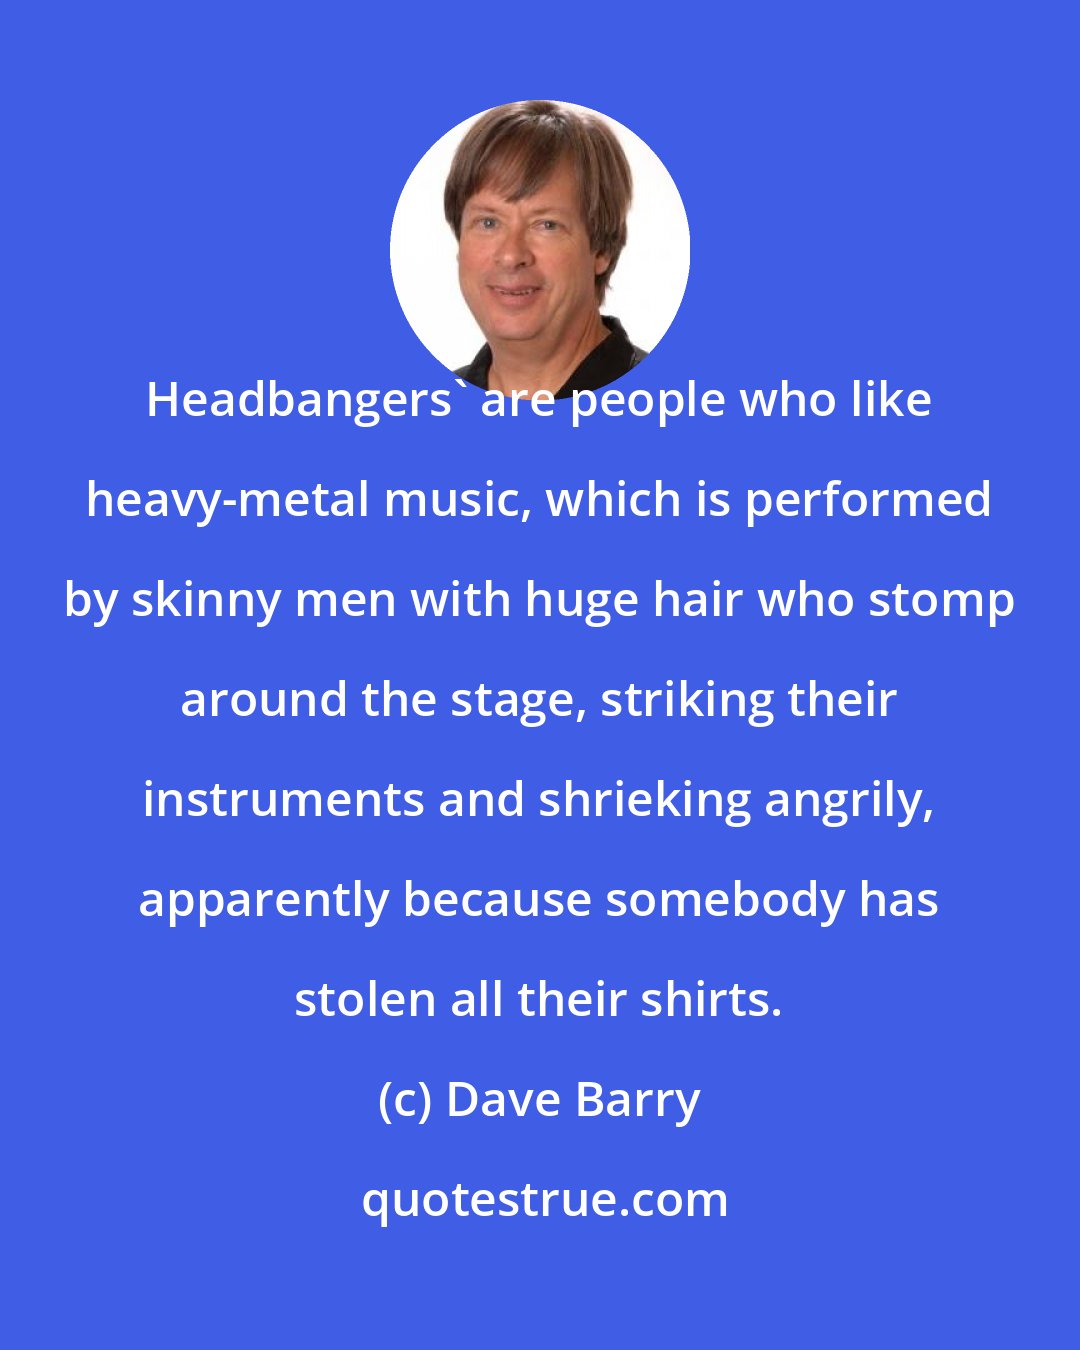 Dave Barry: Headbangers' are people who like heavy-metal music, which is performed by skinny men with huge hair who stomp around the stage, striking their instruments and shrieking angrily, apparently because somebody has stolen all their shirts.